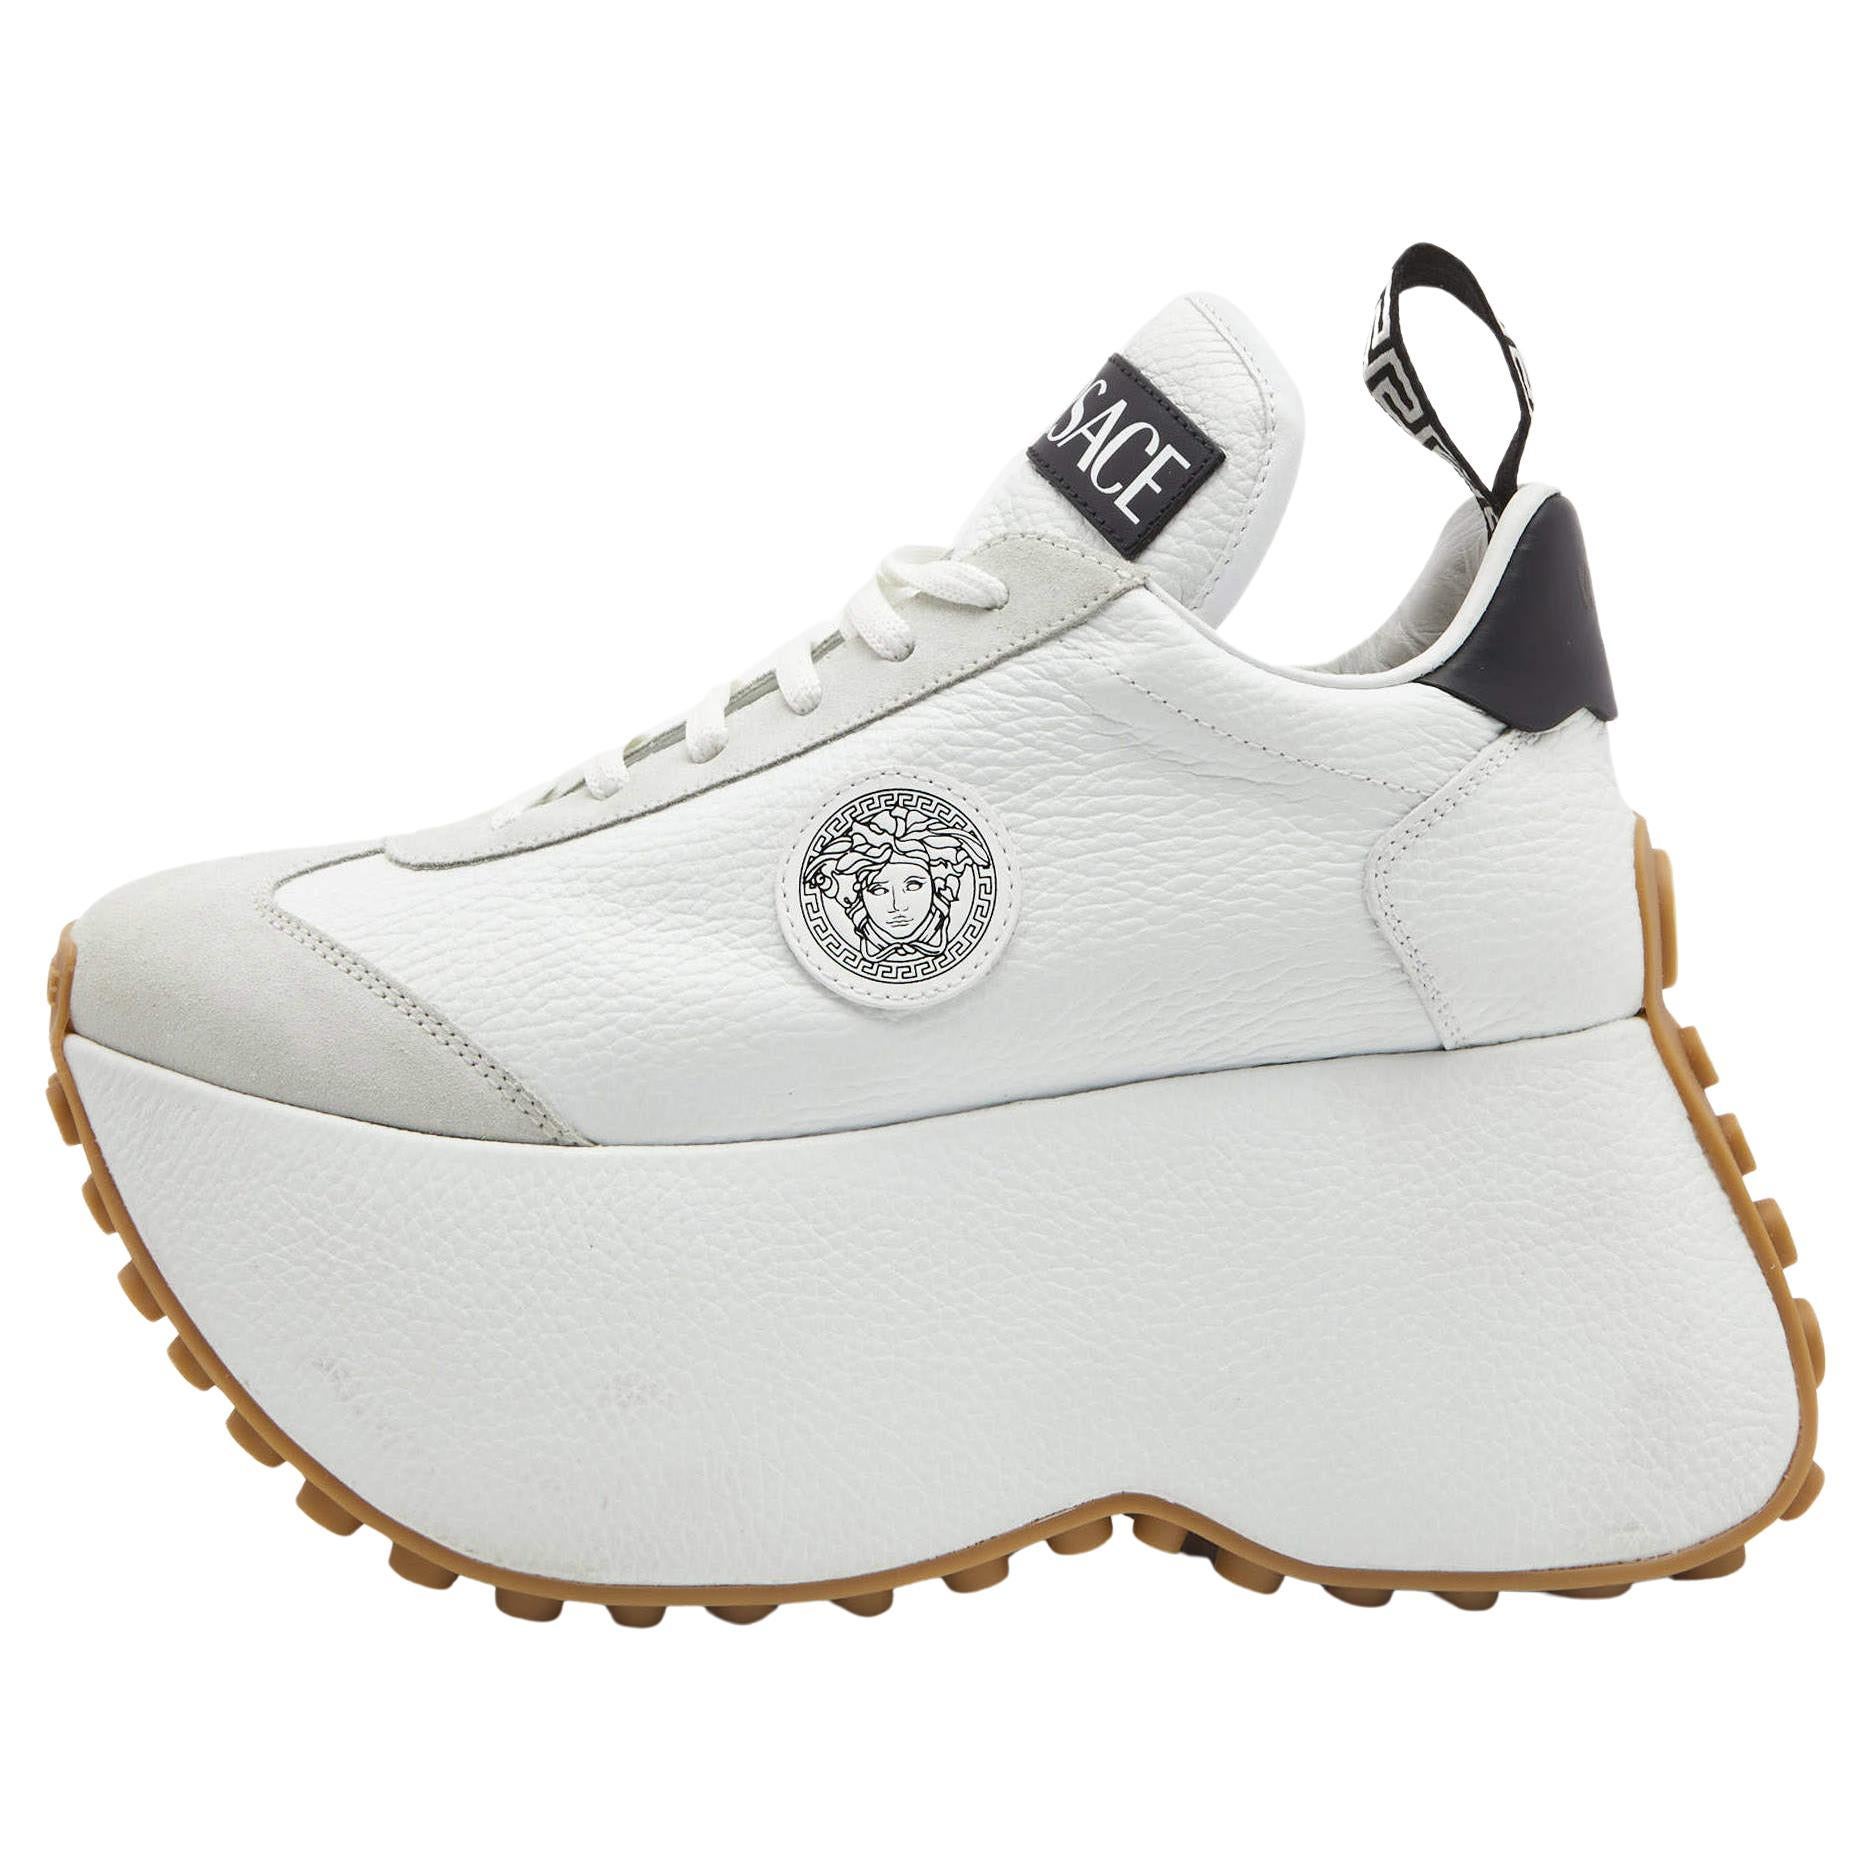 Versace White Leather and Suede Medusa Charm Detail Platform Sneakers Size 37.5